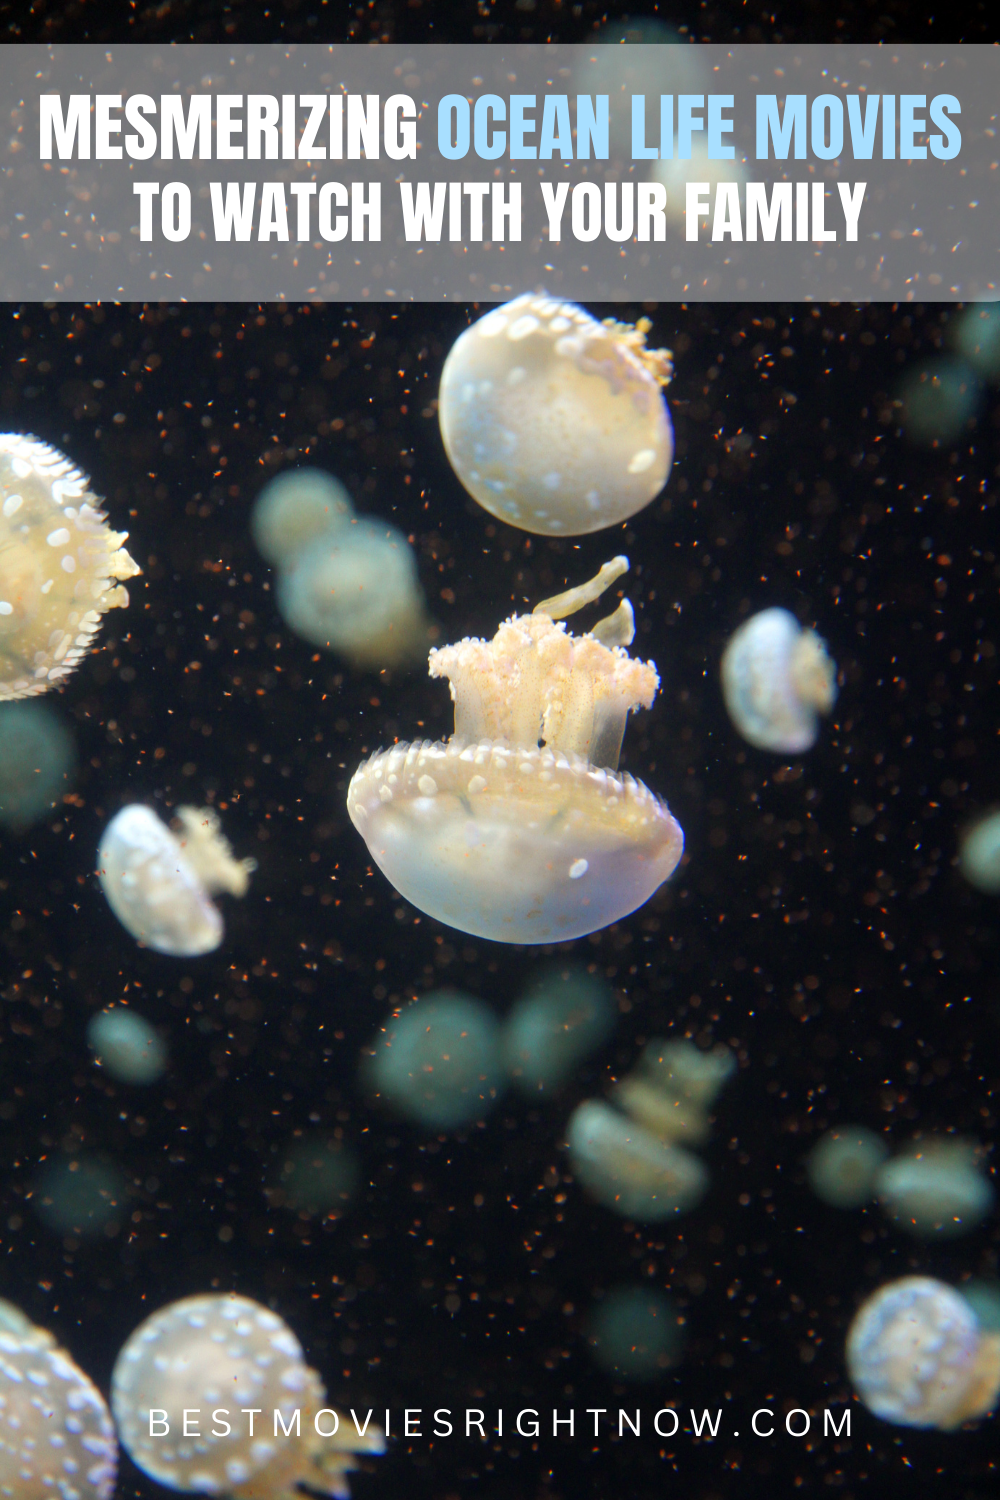 a picture of jellyfishes underwater with caption 